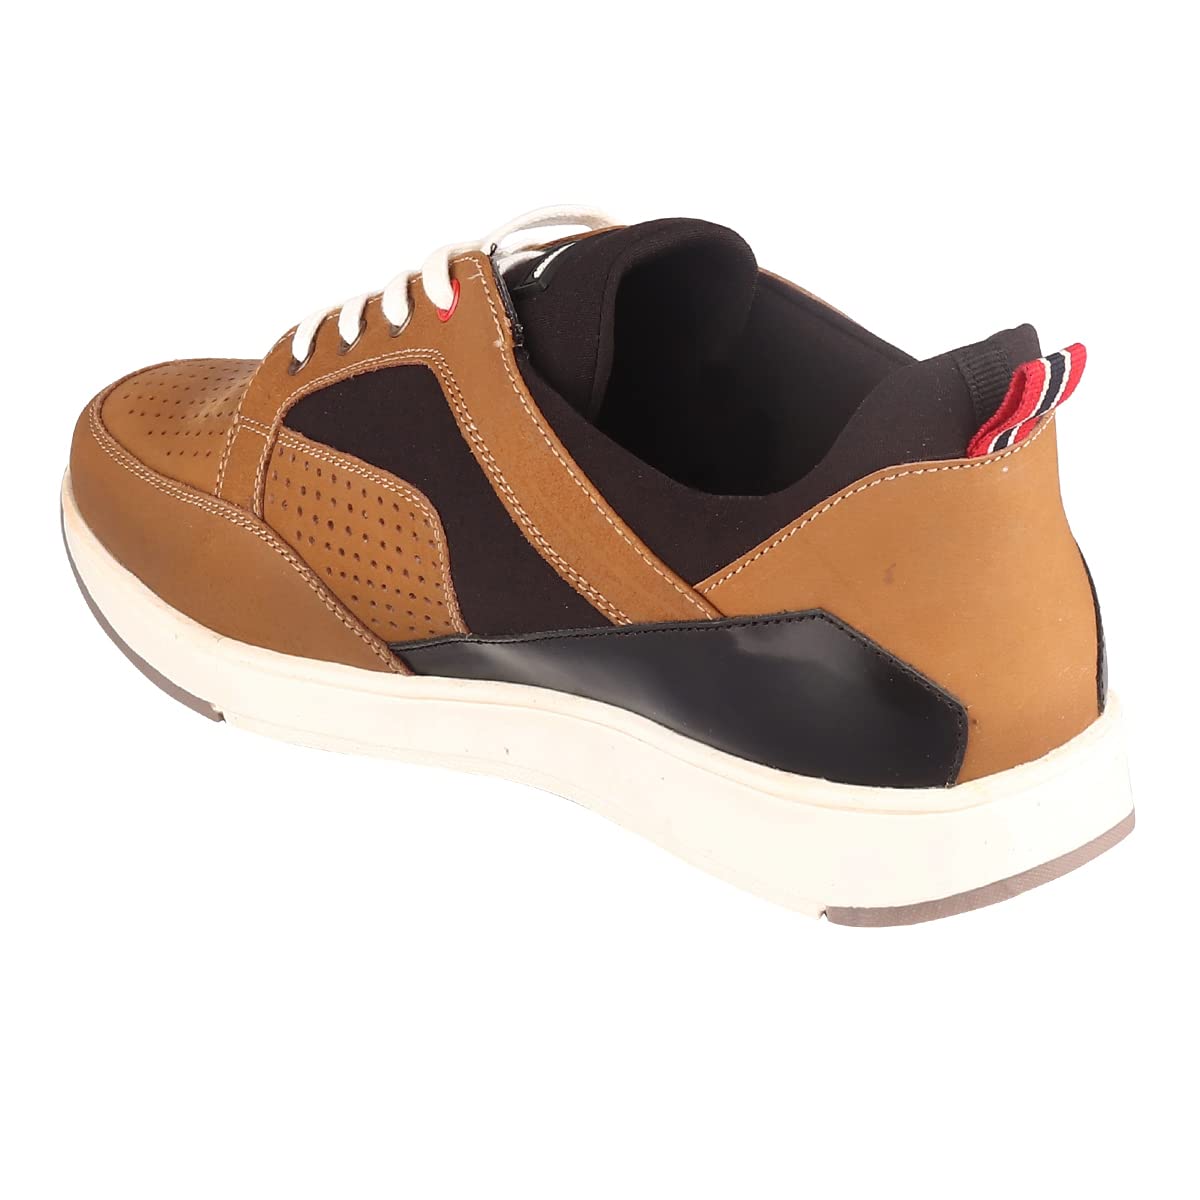 Red Chief Casual Sneaker Shoes for Men Rust